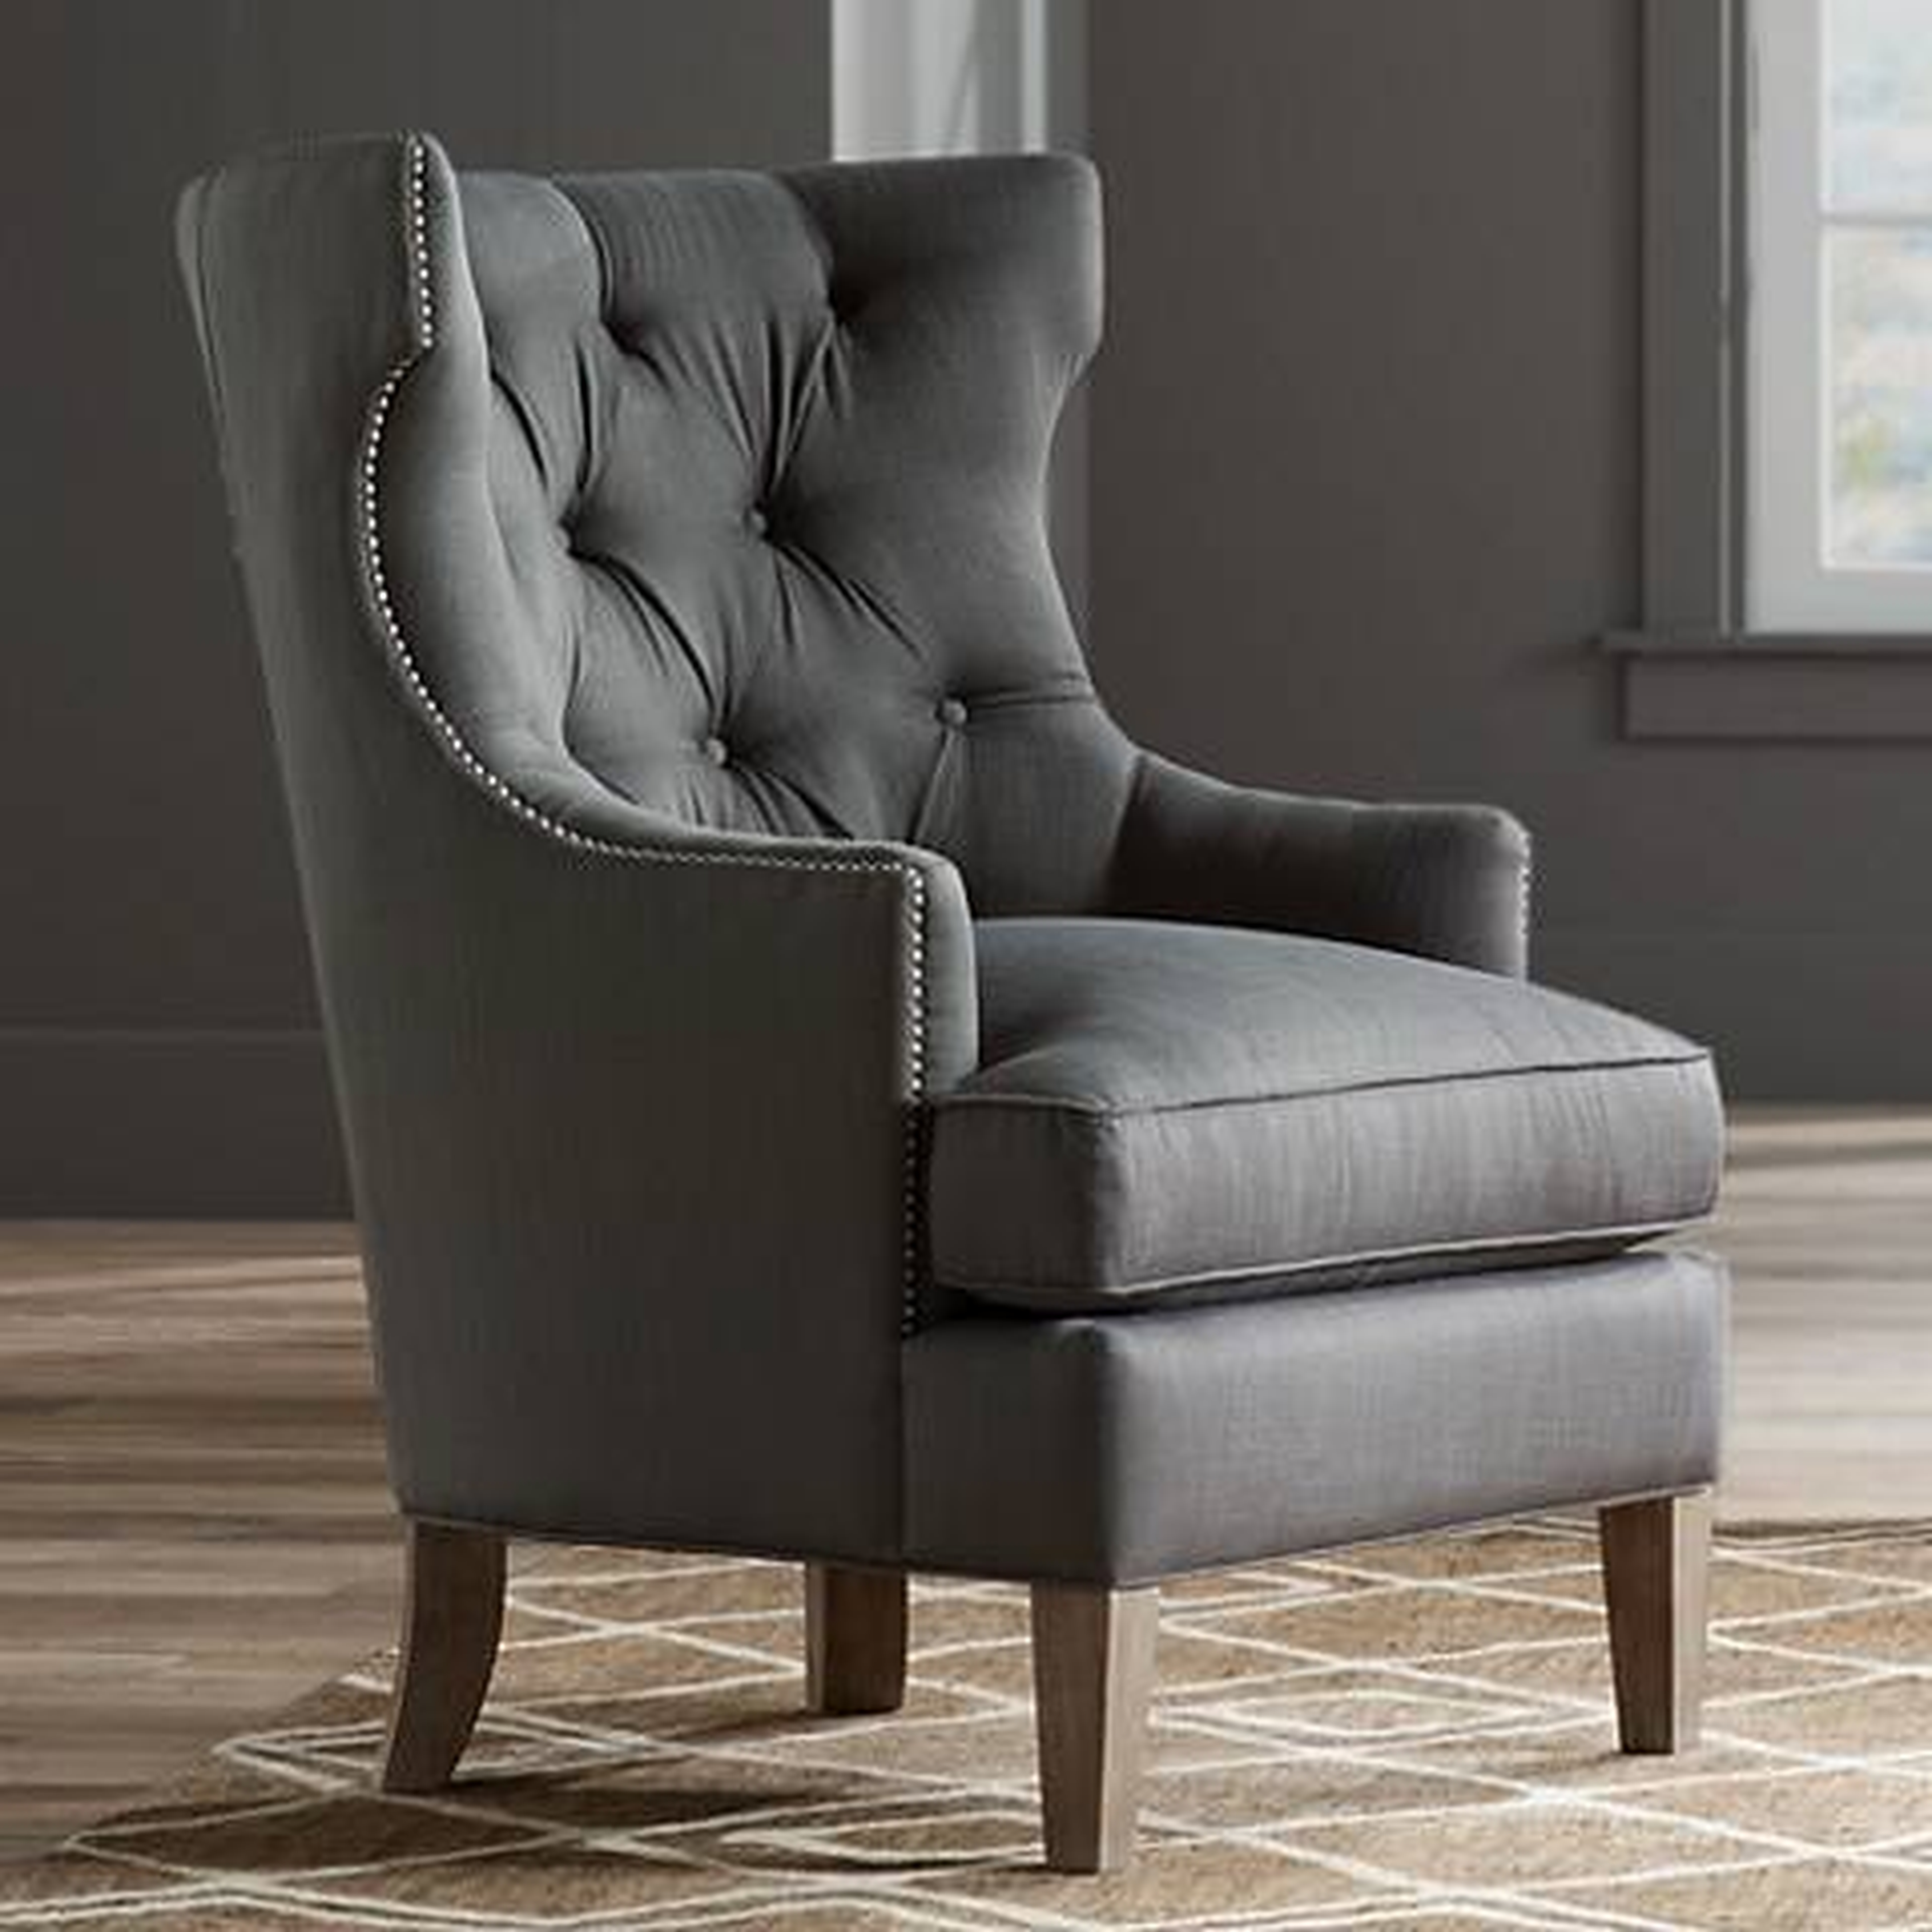 Reese Studio Charcoal High-Back Accent Chair - Lamps Plus